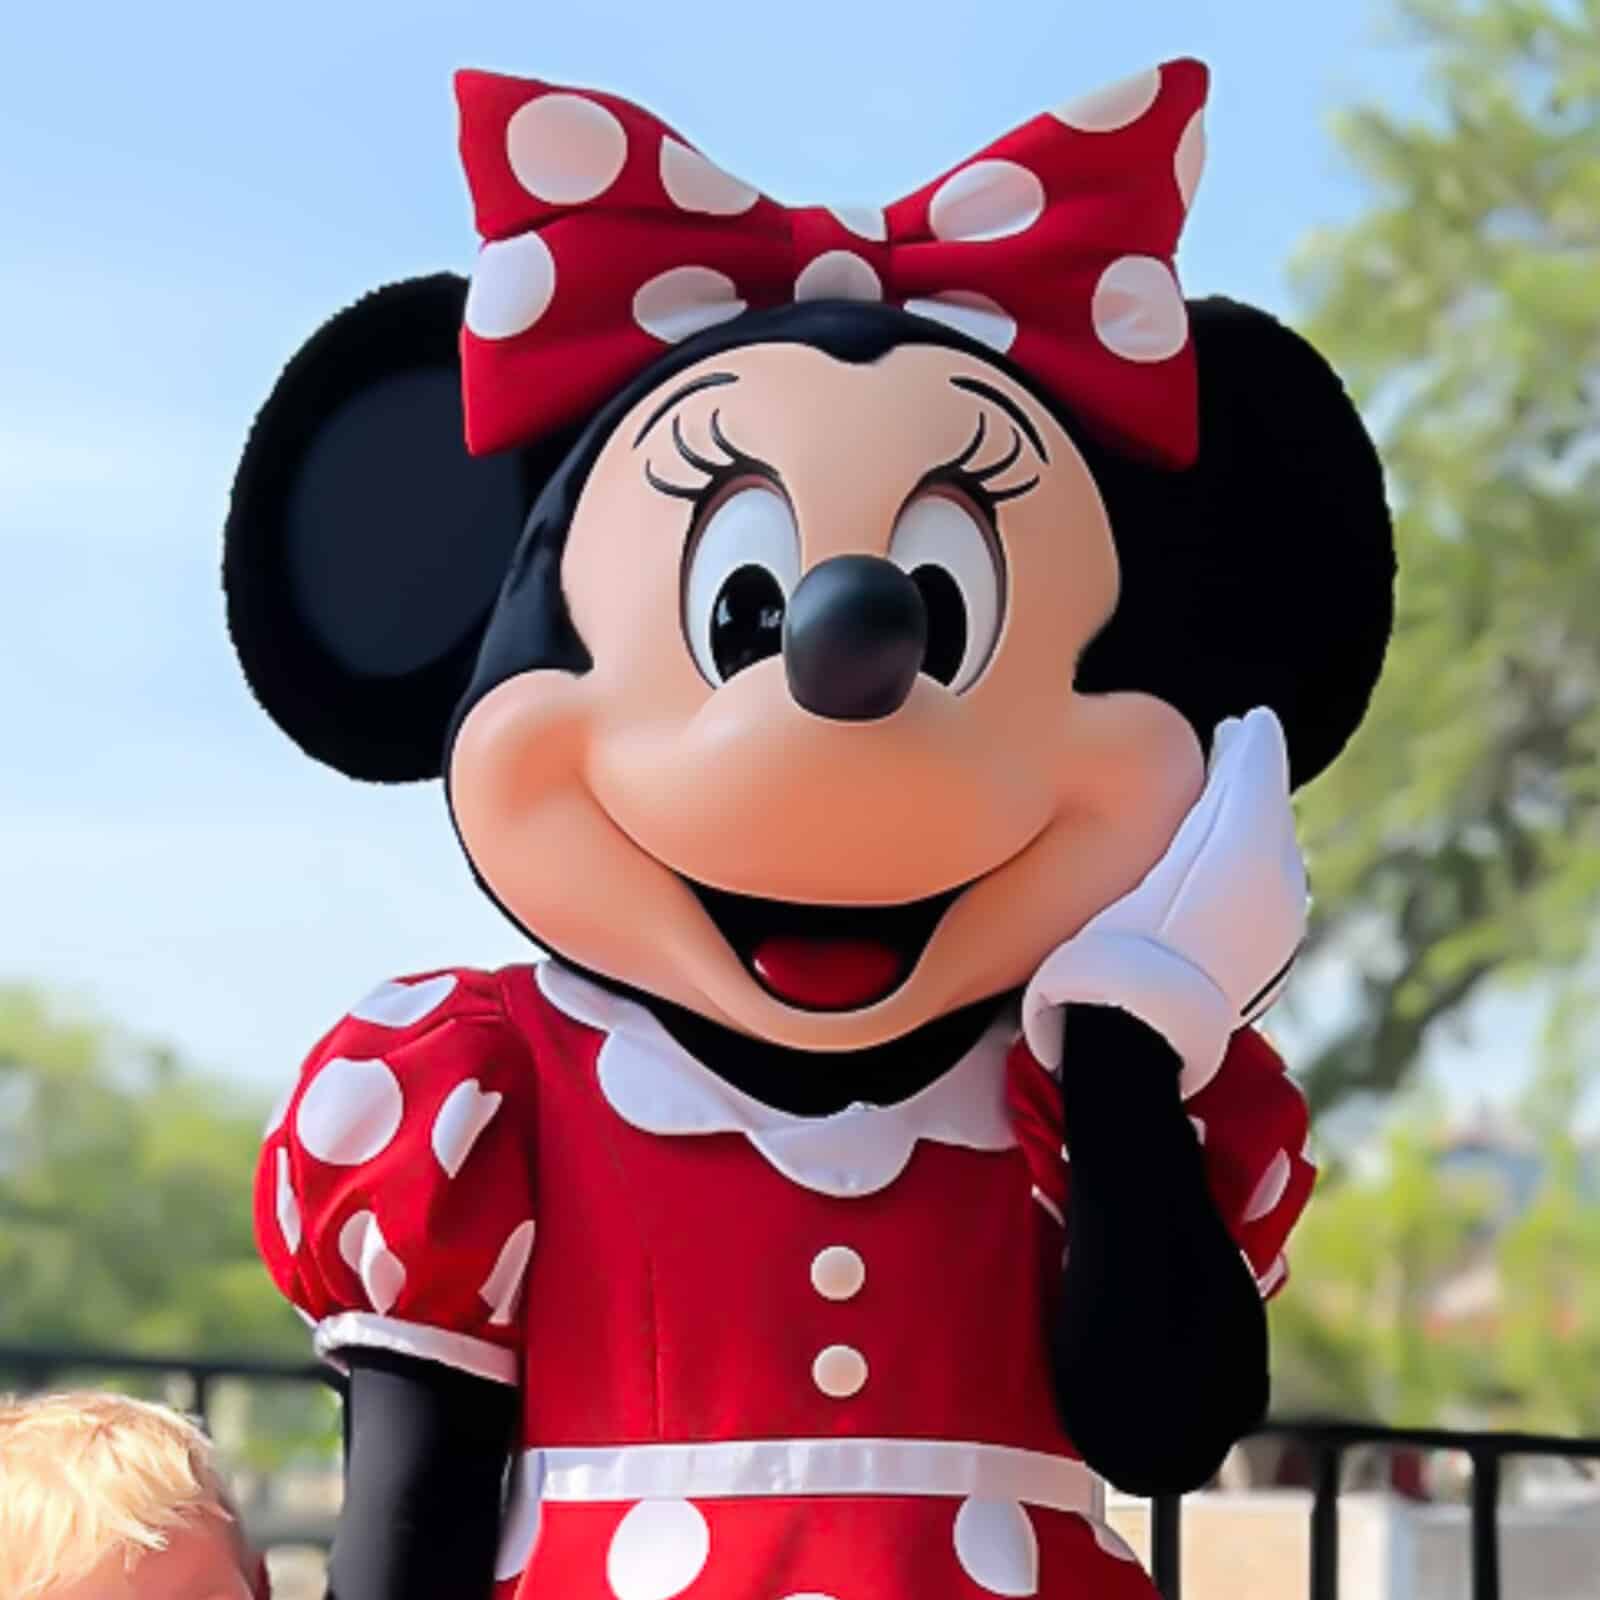 Meet and Greet Photos Location with Minnie Mouse at EPCOT near World Showcase